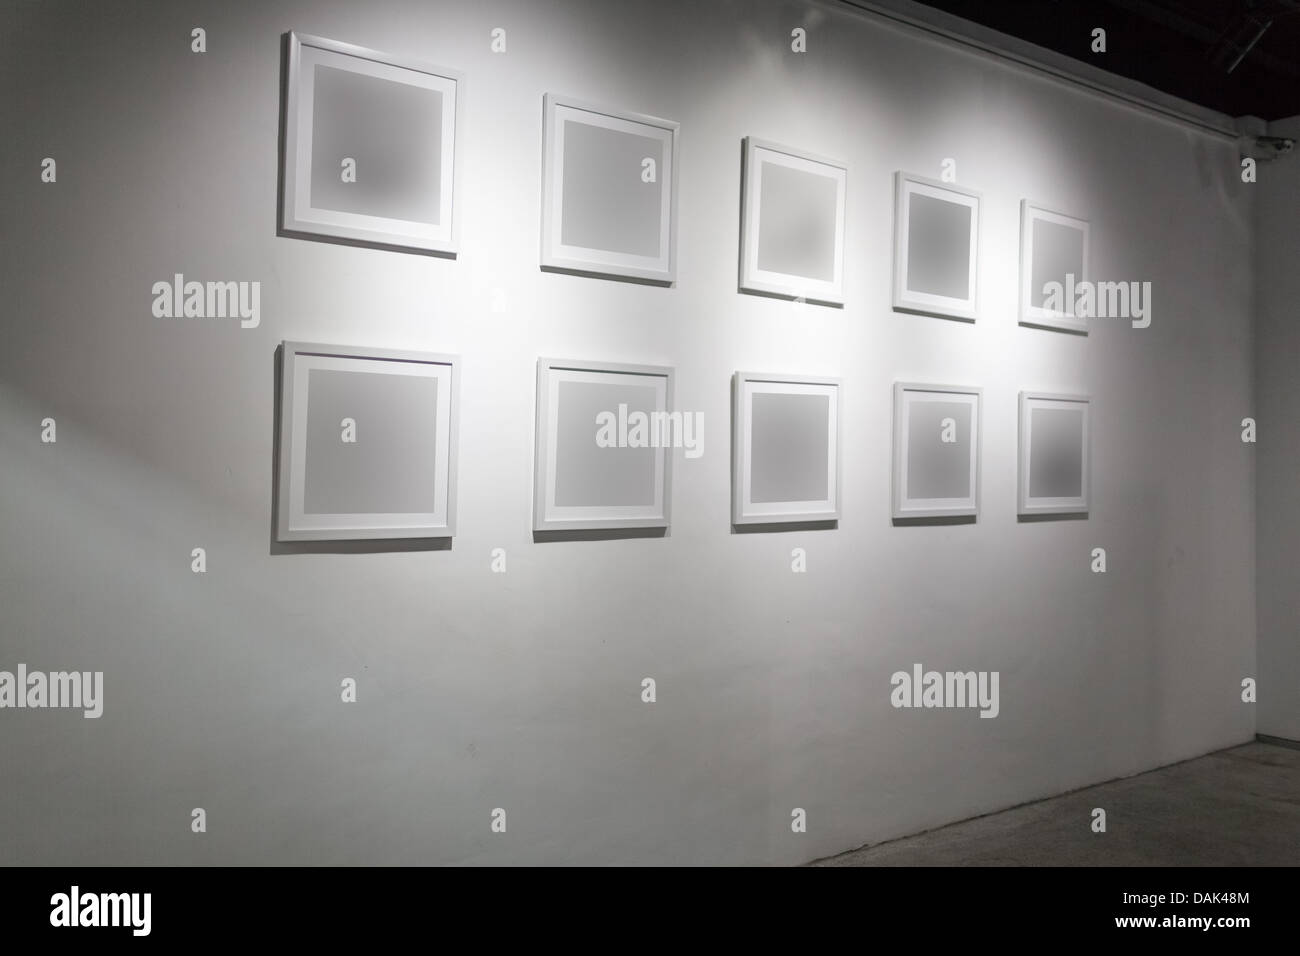 the art gallery without anyone, blank frame. Stock Photo